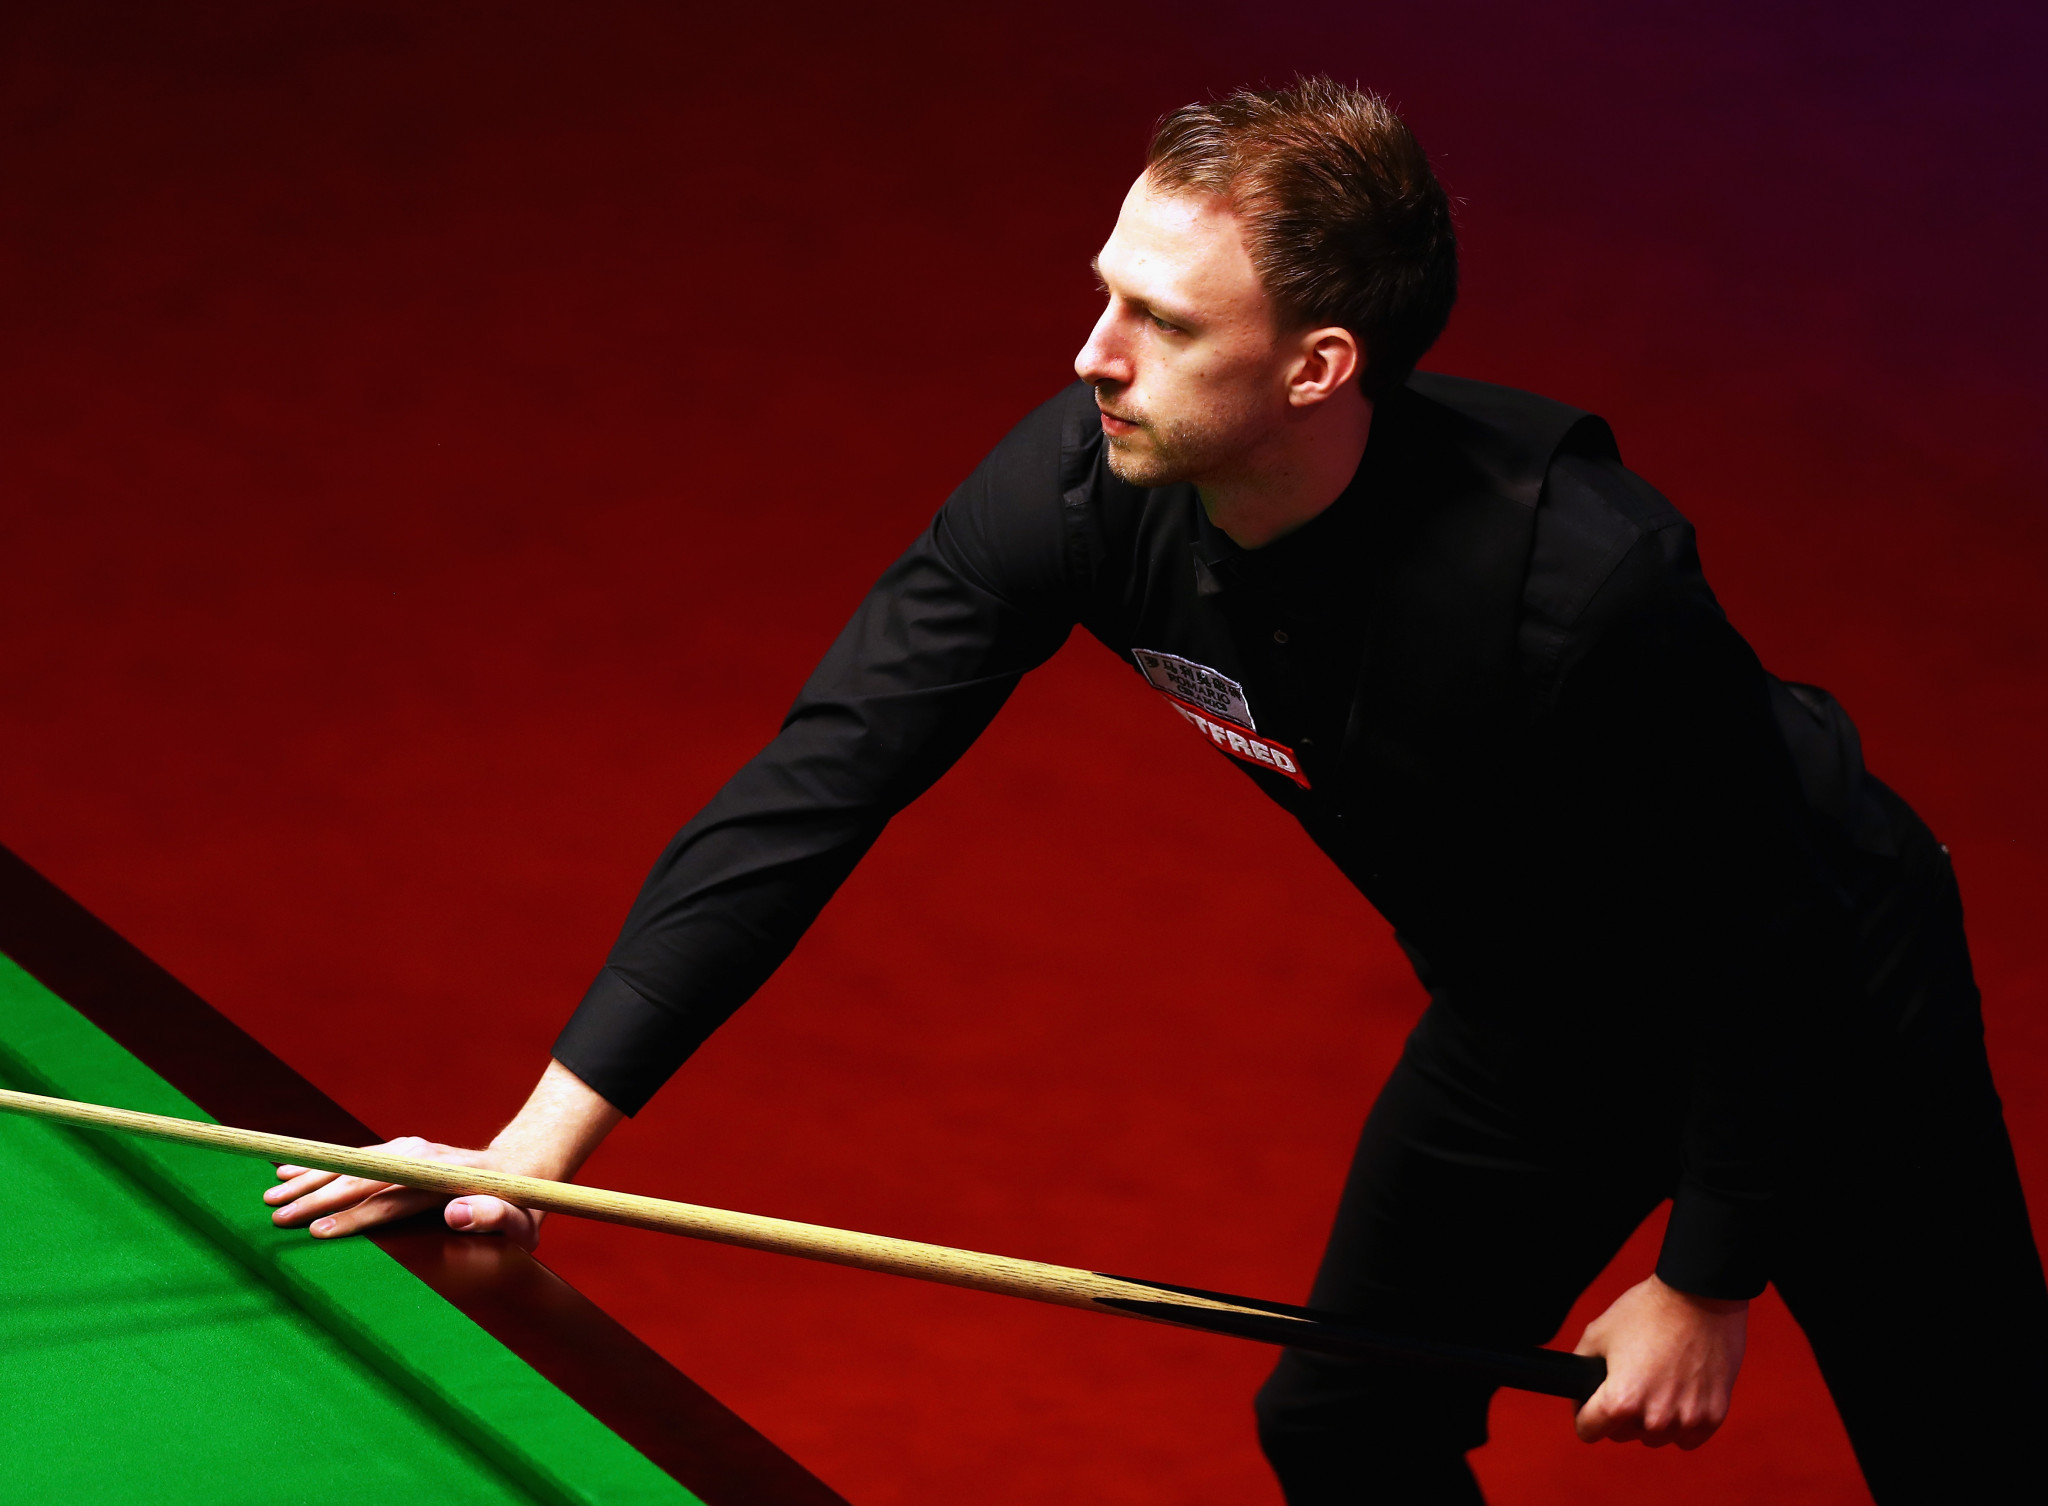 England's Judd Trump, pictured, put in an excellent performance at the World Snooker Championship in Sheffield to see off competition from countryman Ricky Walden ©Getty Images